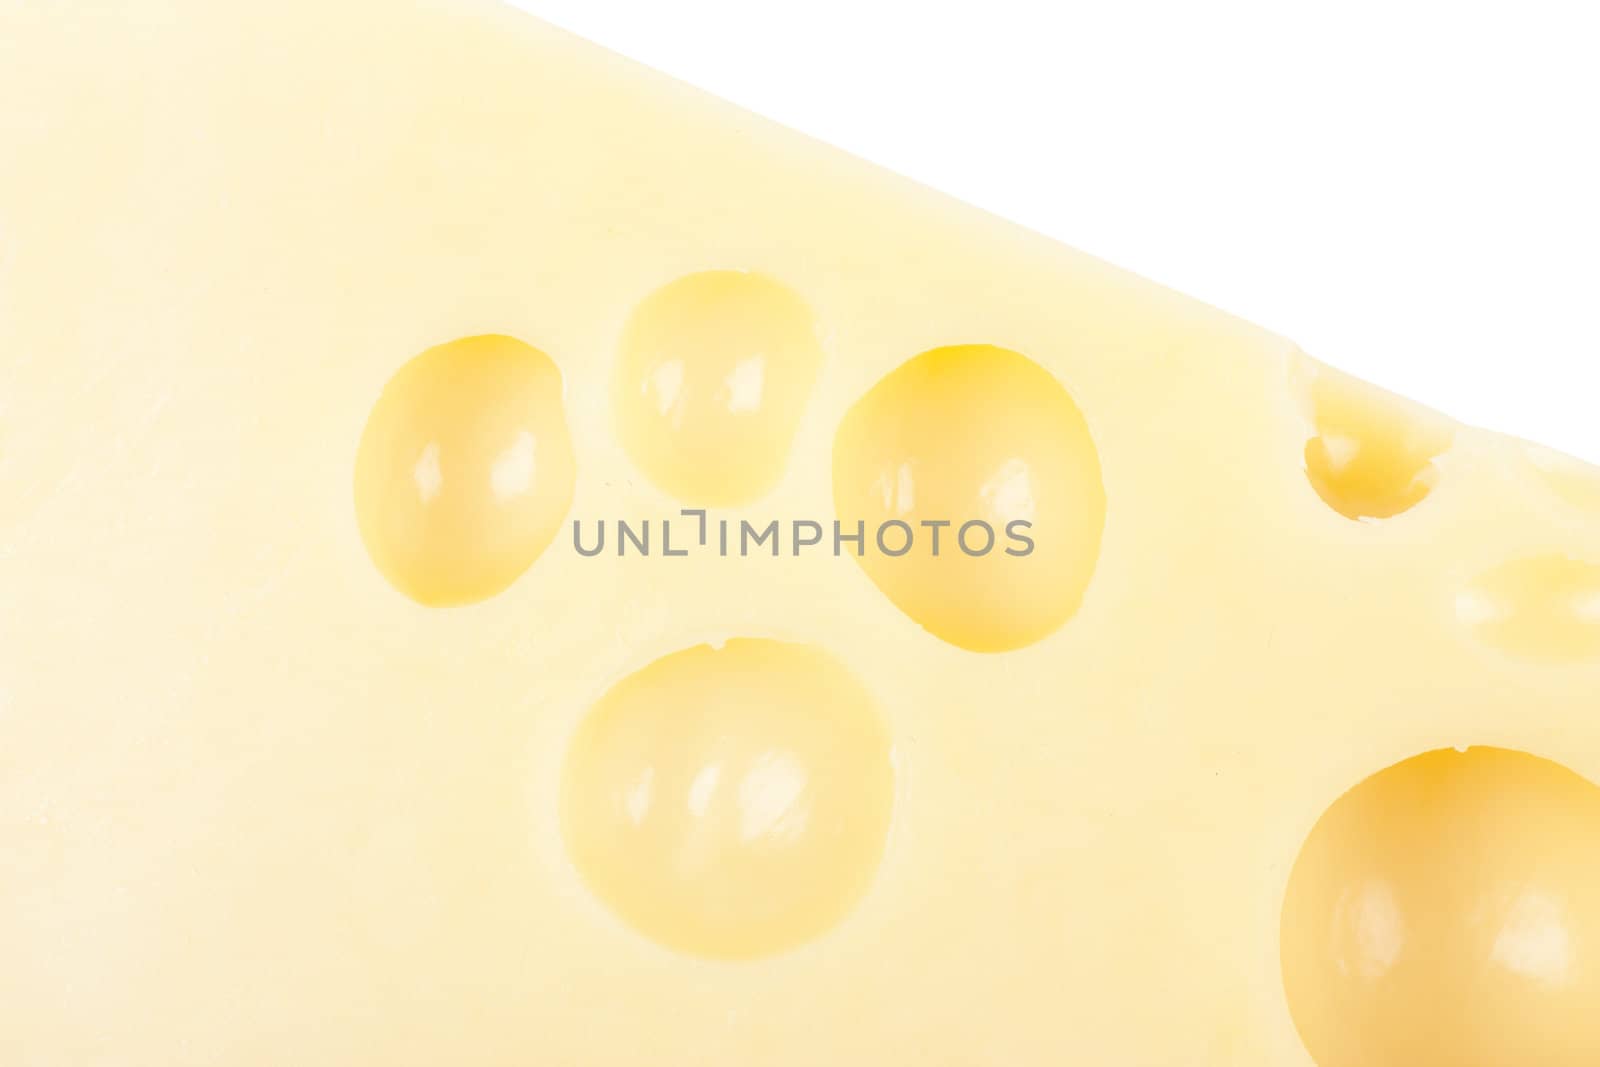 Macro view of piece of cheese